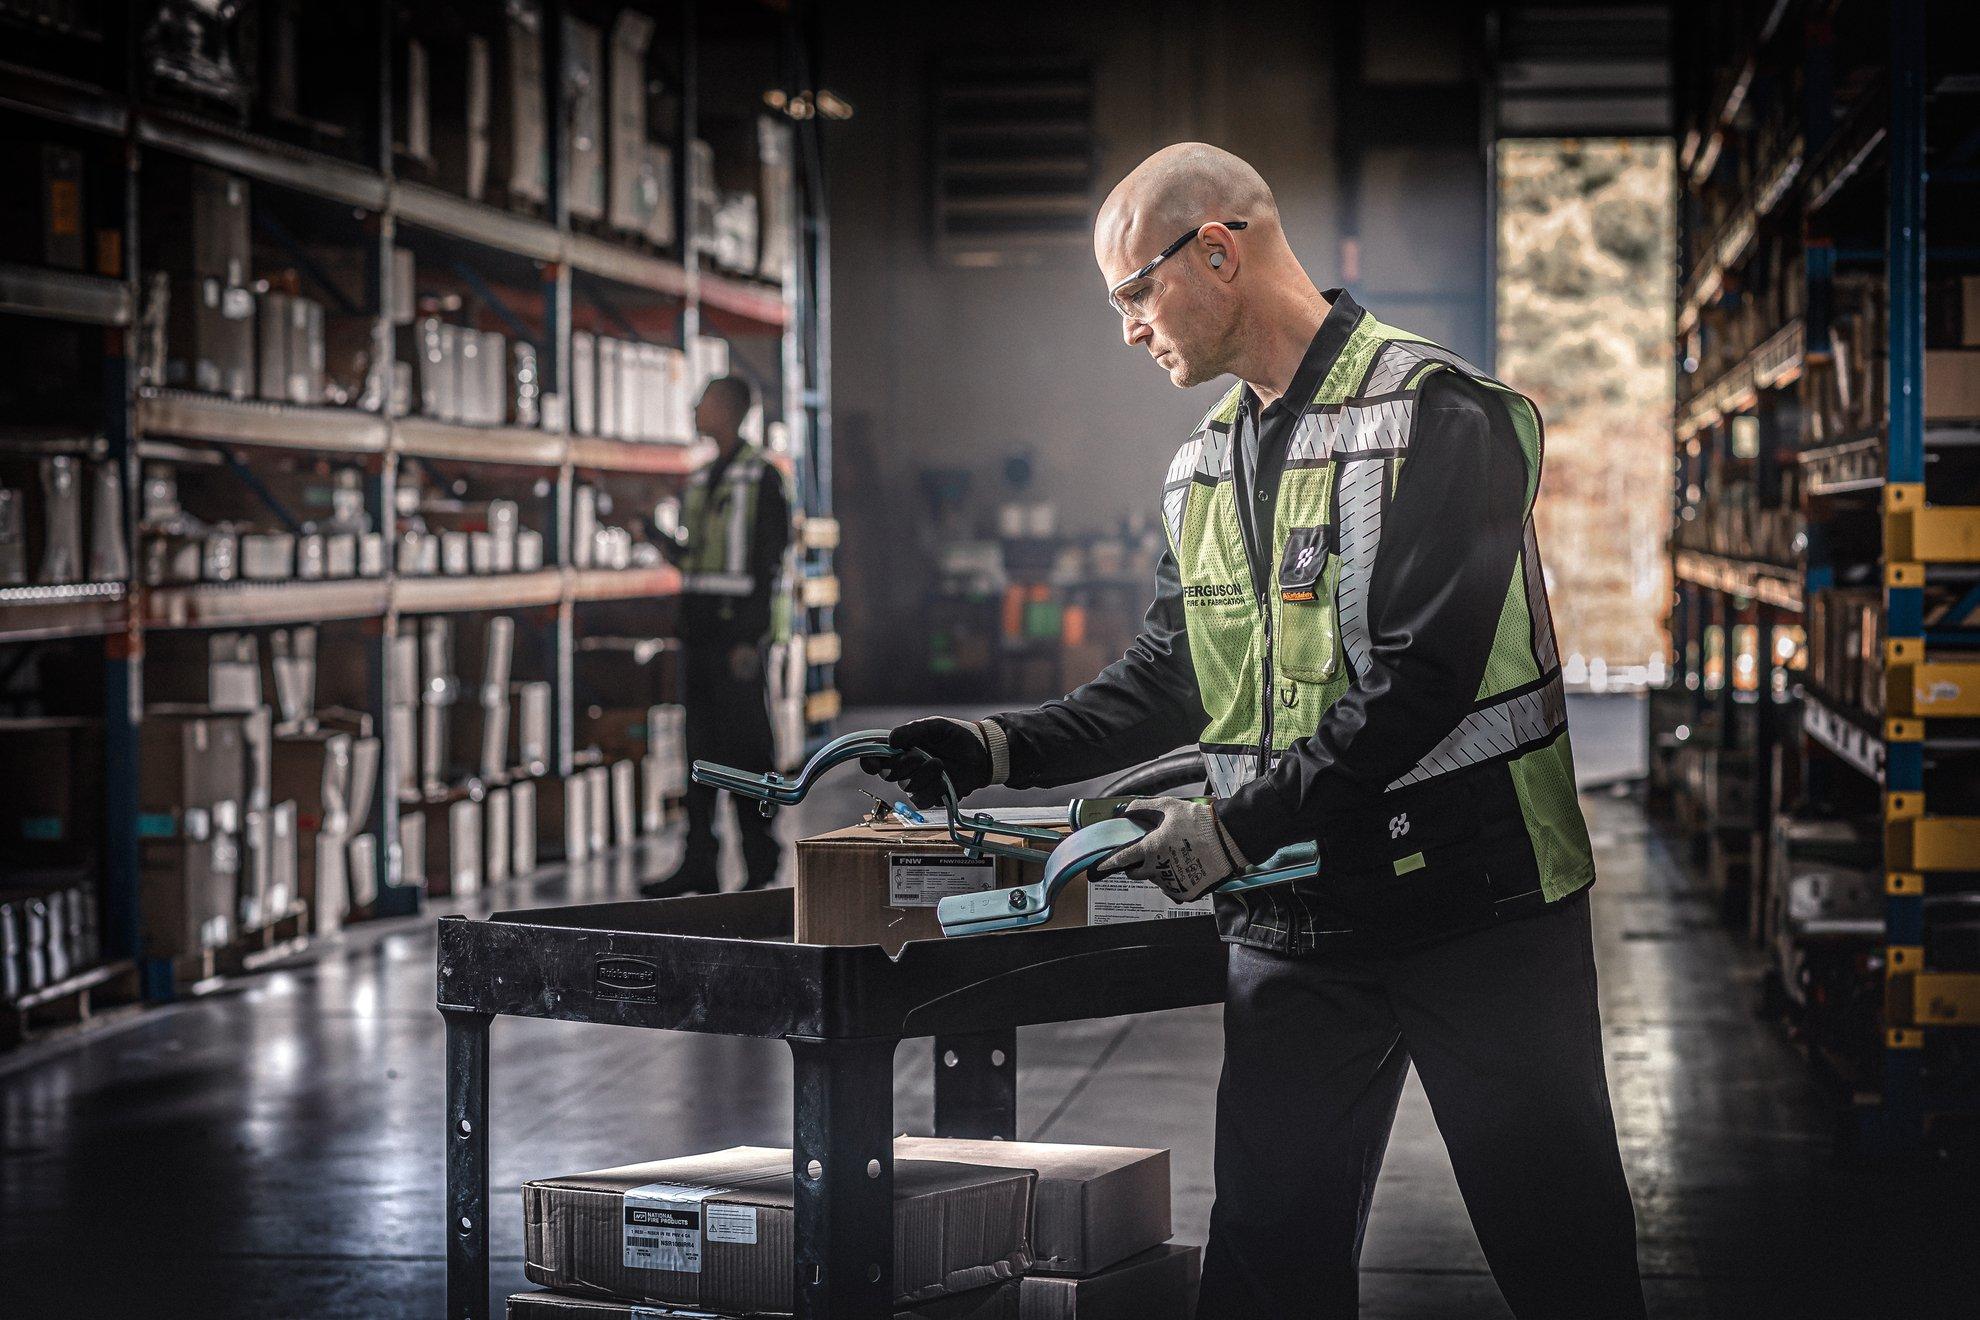 Ferguson associate wearing a reflective vest examines an order of pipe brackets on a wheeled utility cart in a warehouse.